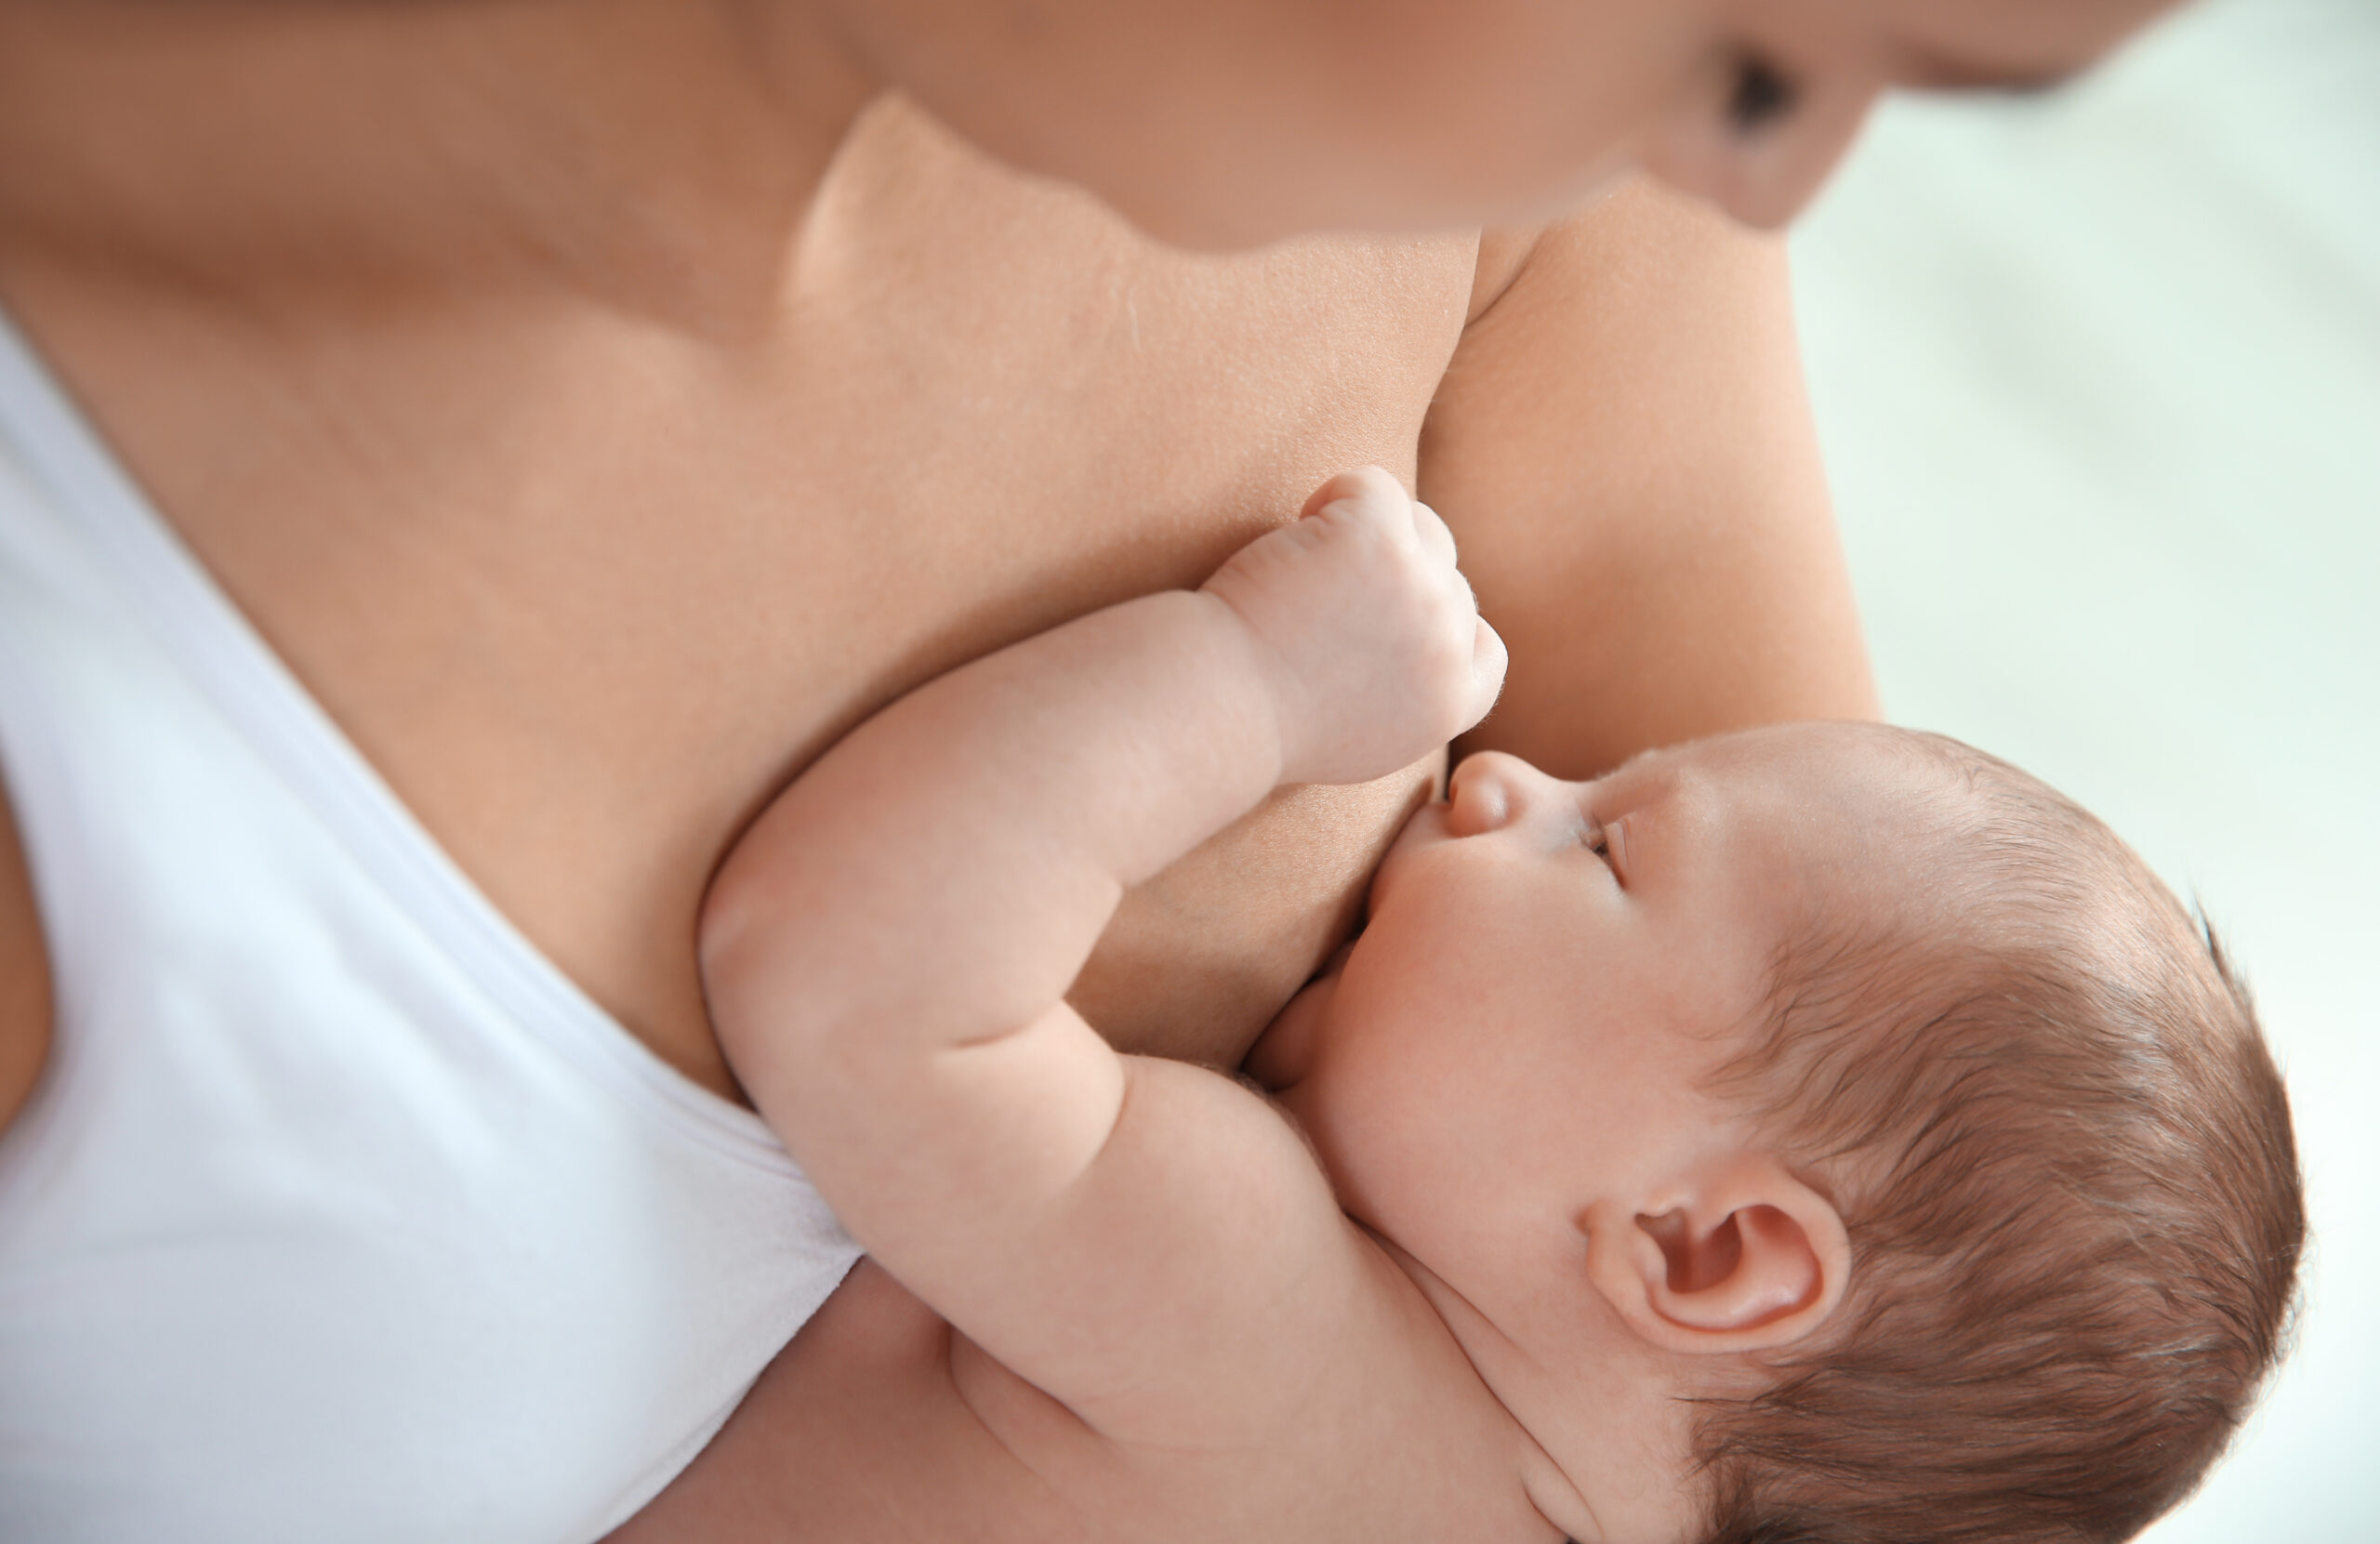 Young,Woman,Breastfeeding,Her,Baby,On,Light,Background,,Closeup